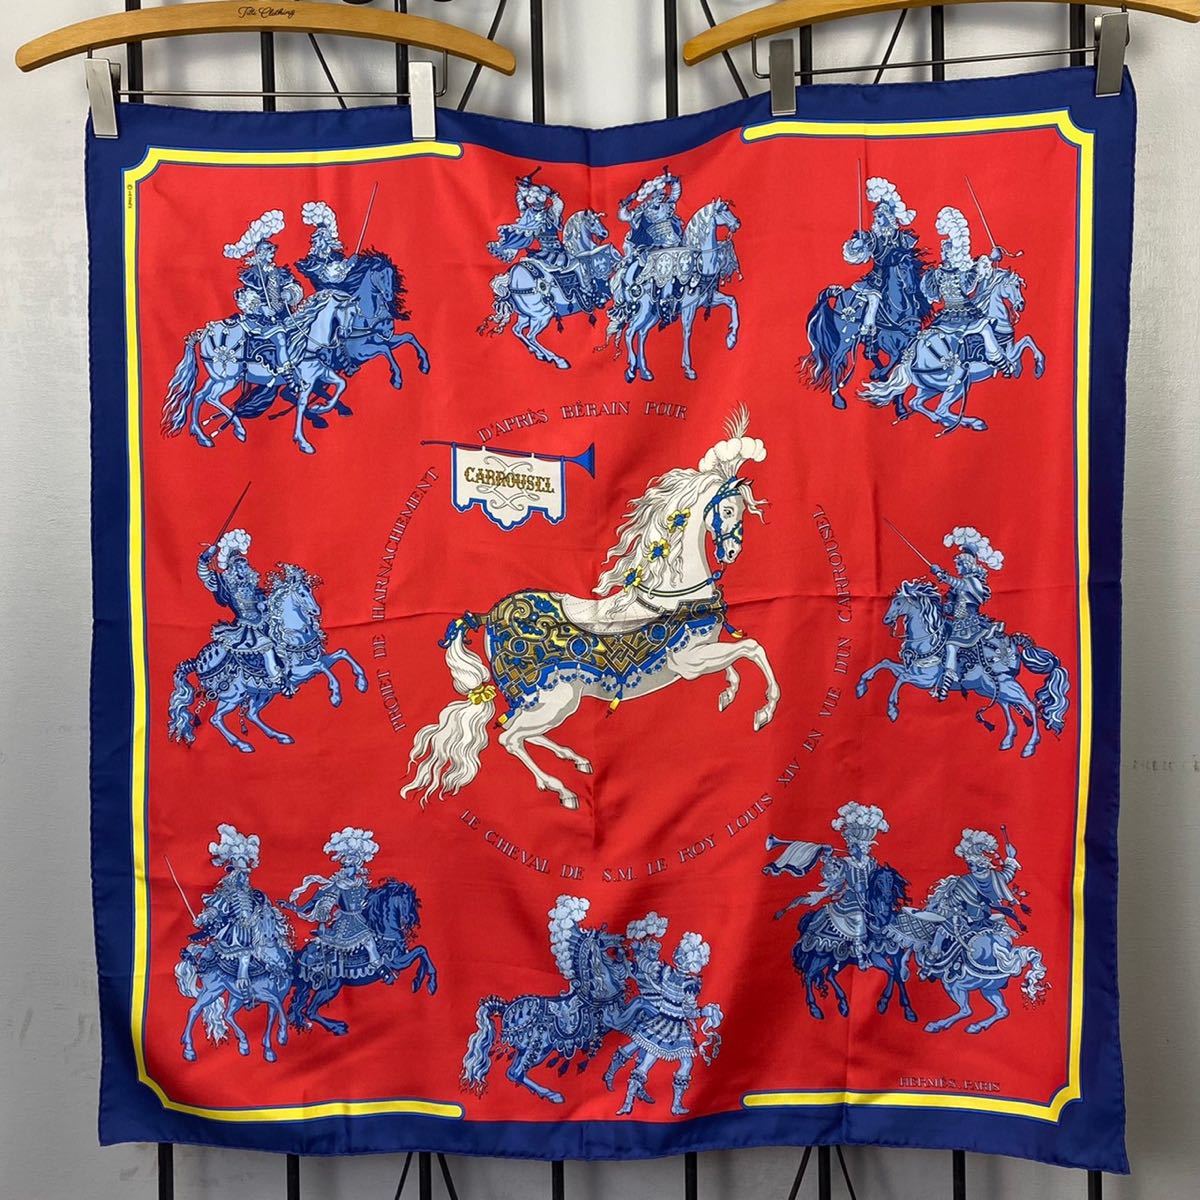 HERMES CARRE90 SILK SCARF CARROUSEL MADE IN FRANCE/エルメスカレ90シルク100%スカーフ(メリーゴーランド )